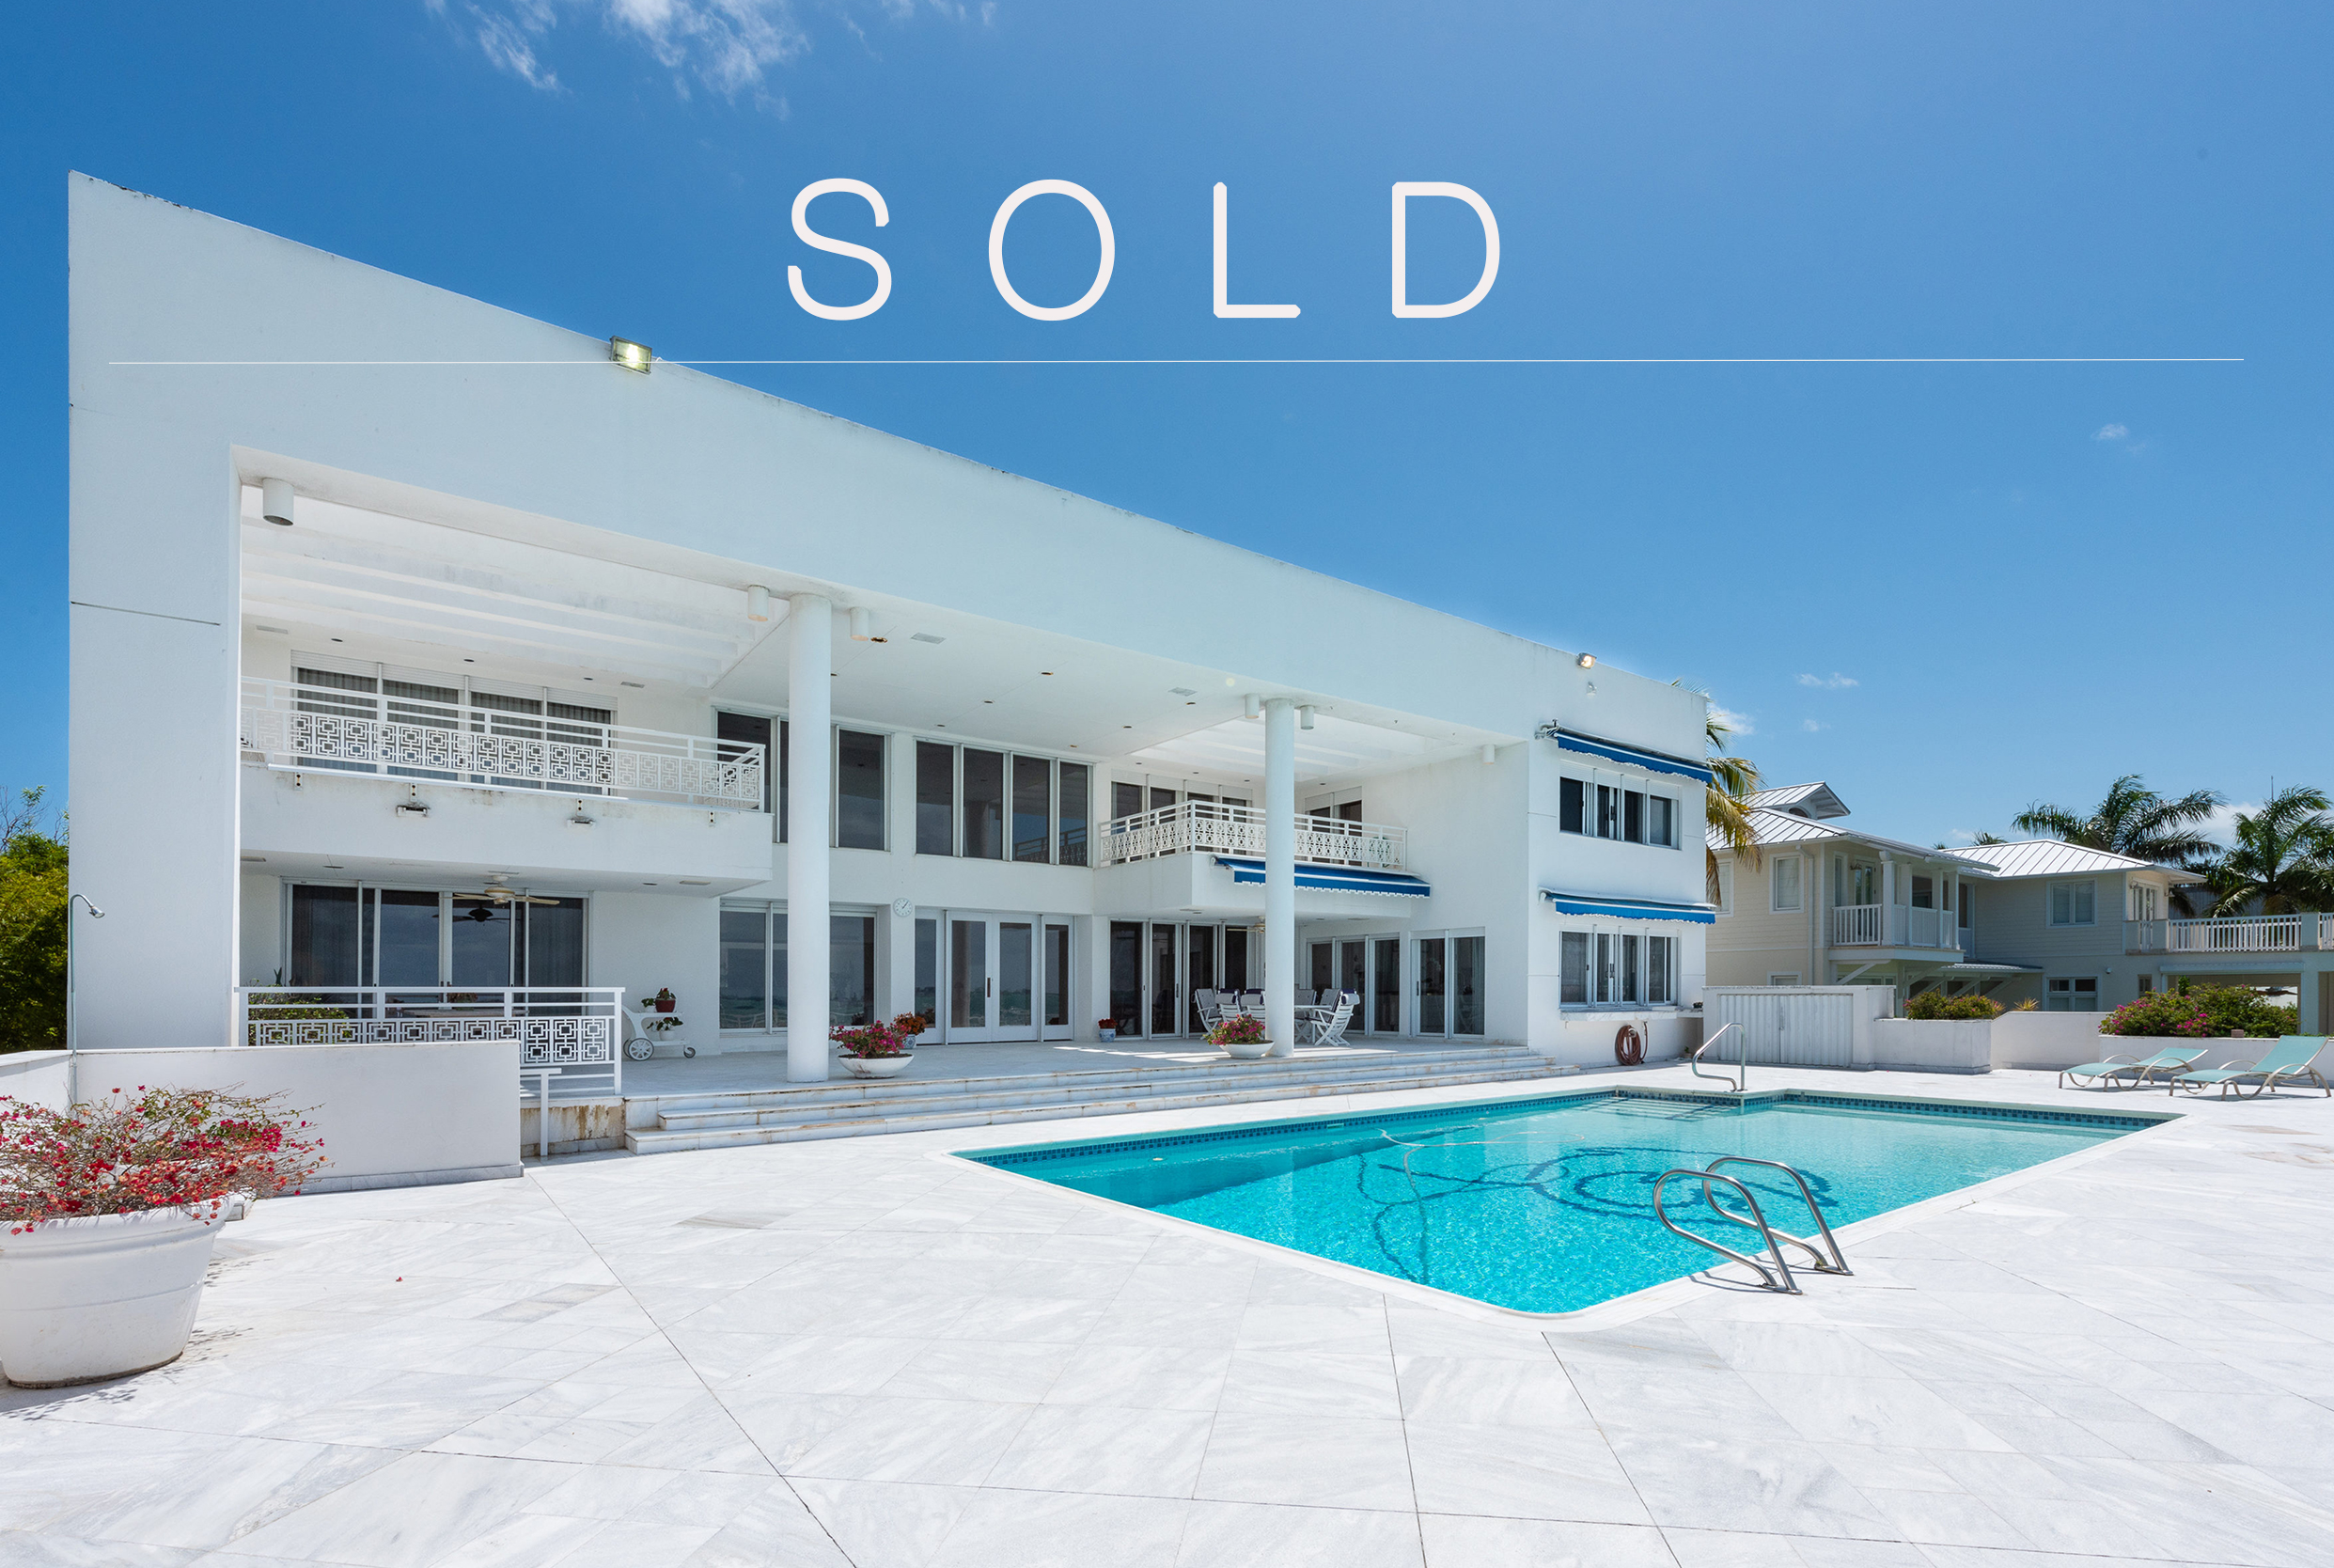 Sold Luxury Home on Key Biscayne, Florida, by Top Agent Nelson Gonzalez